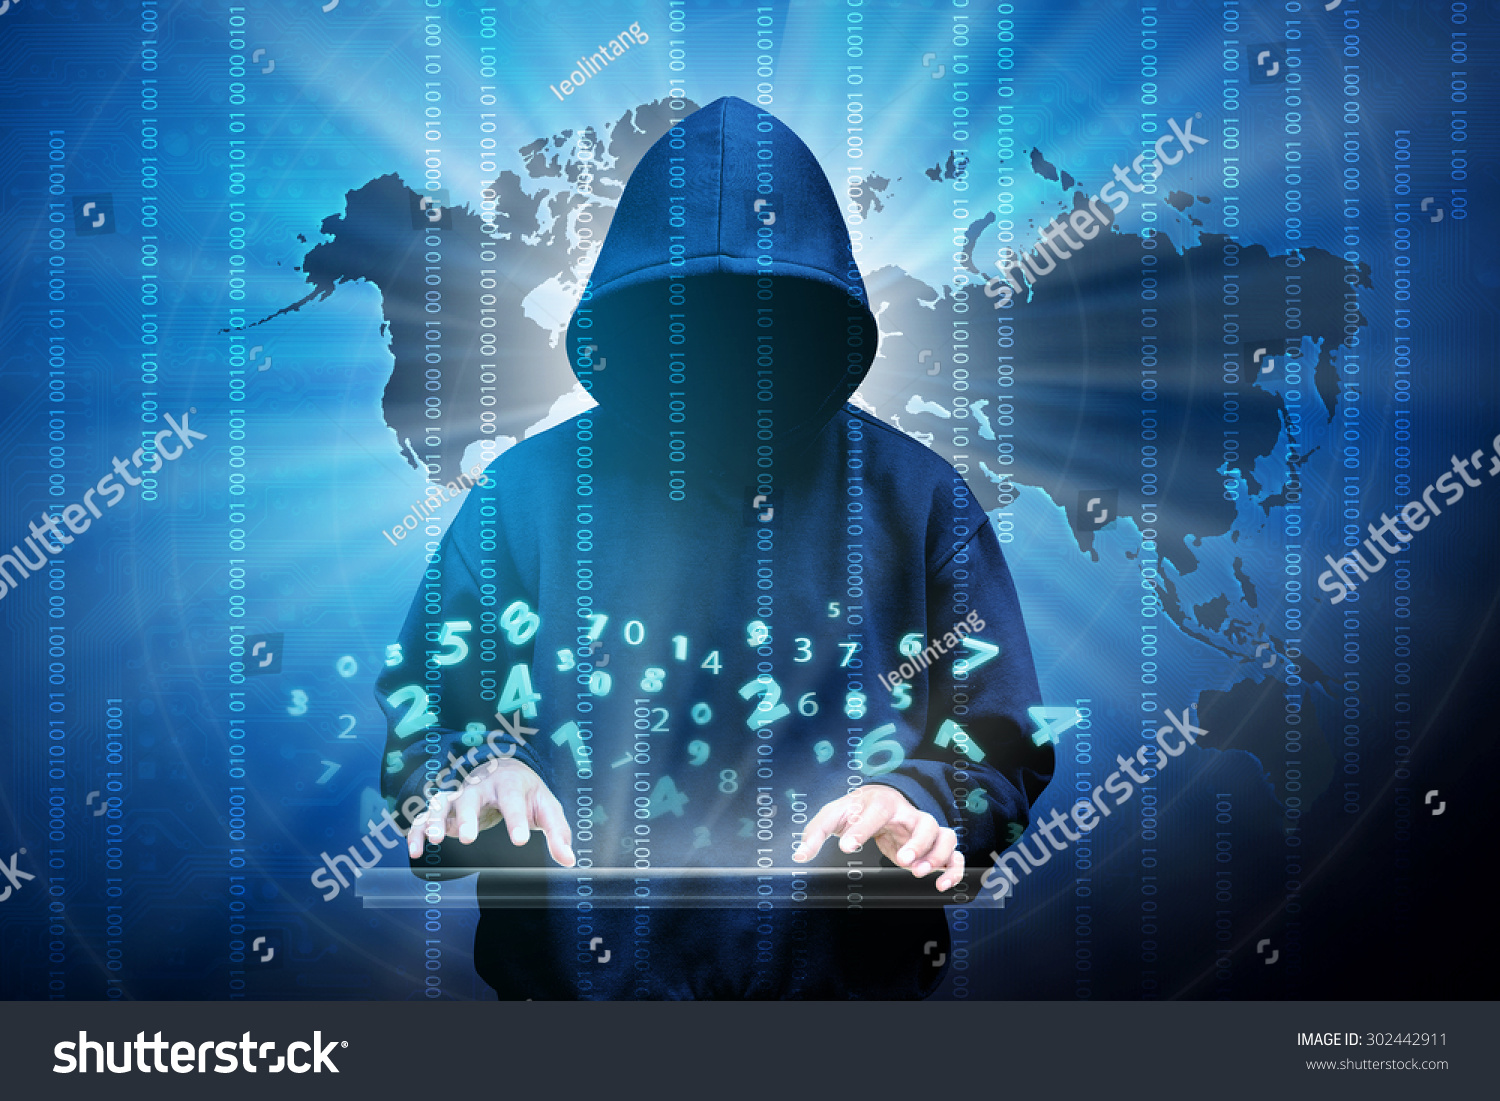 Computer hacker silhouette of hooded man with binary data and network security terms #302442911